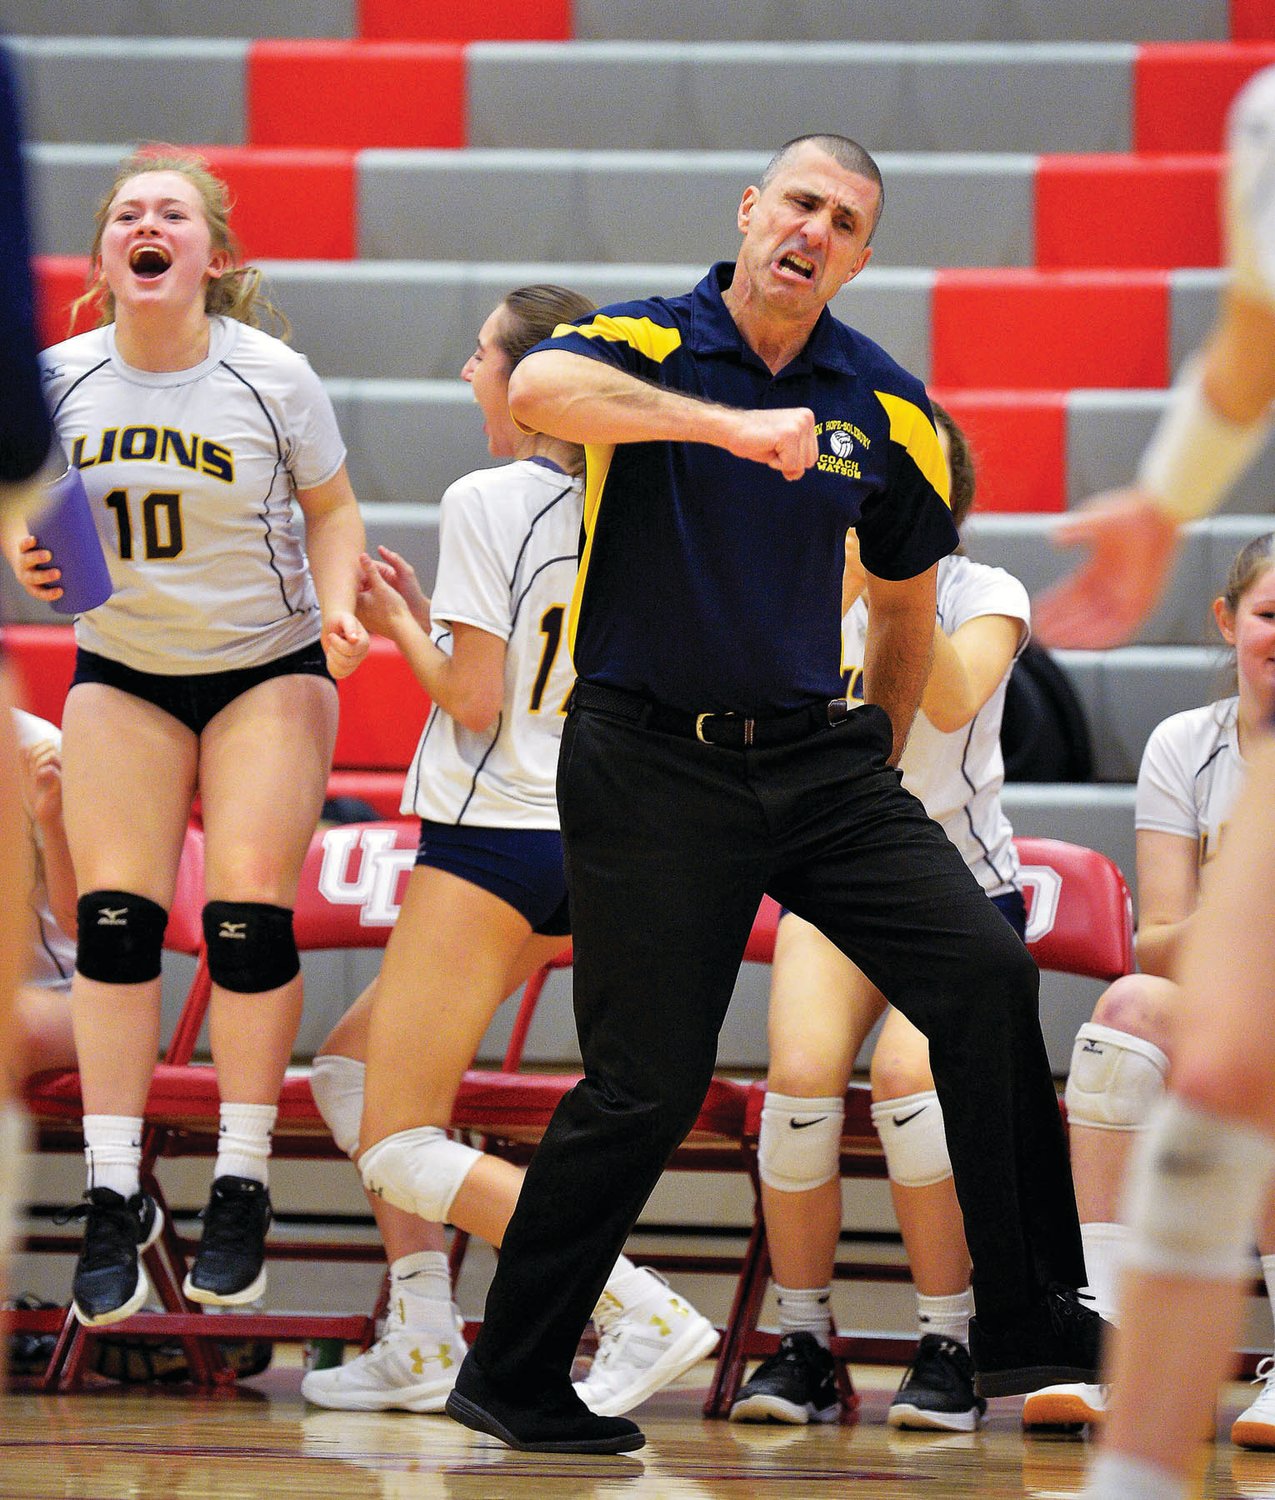 Lions coach Roy Watson is fired up on the court. Photograph by Michael A. Apice